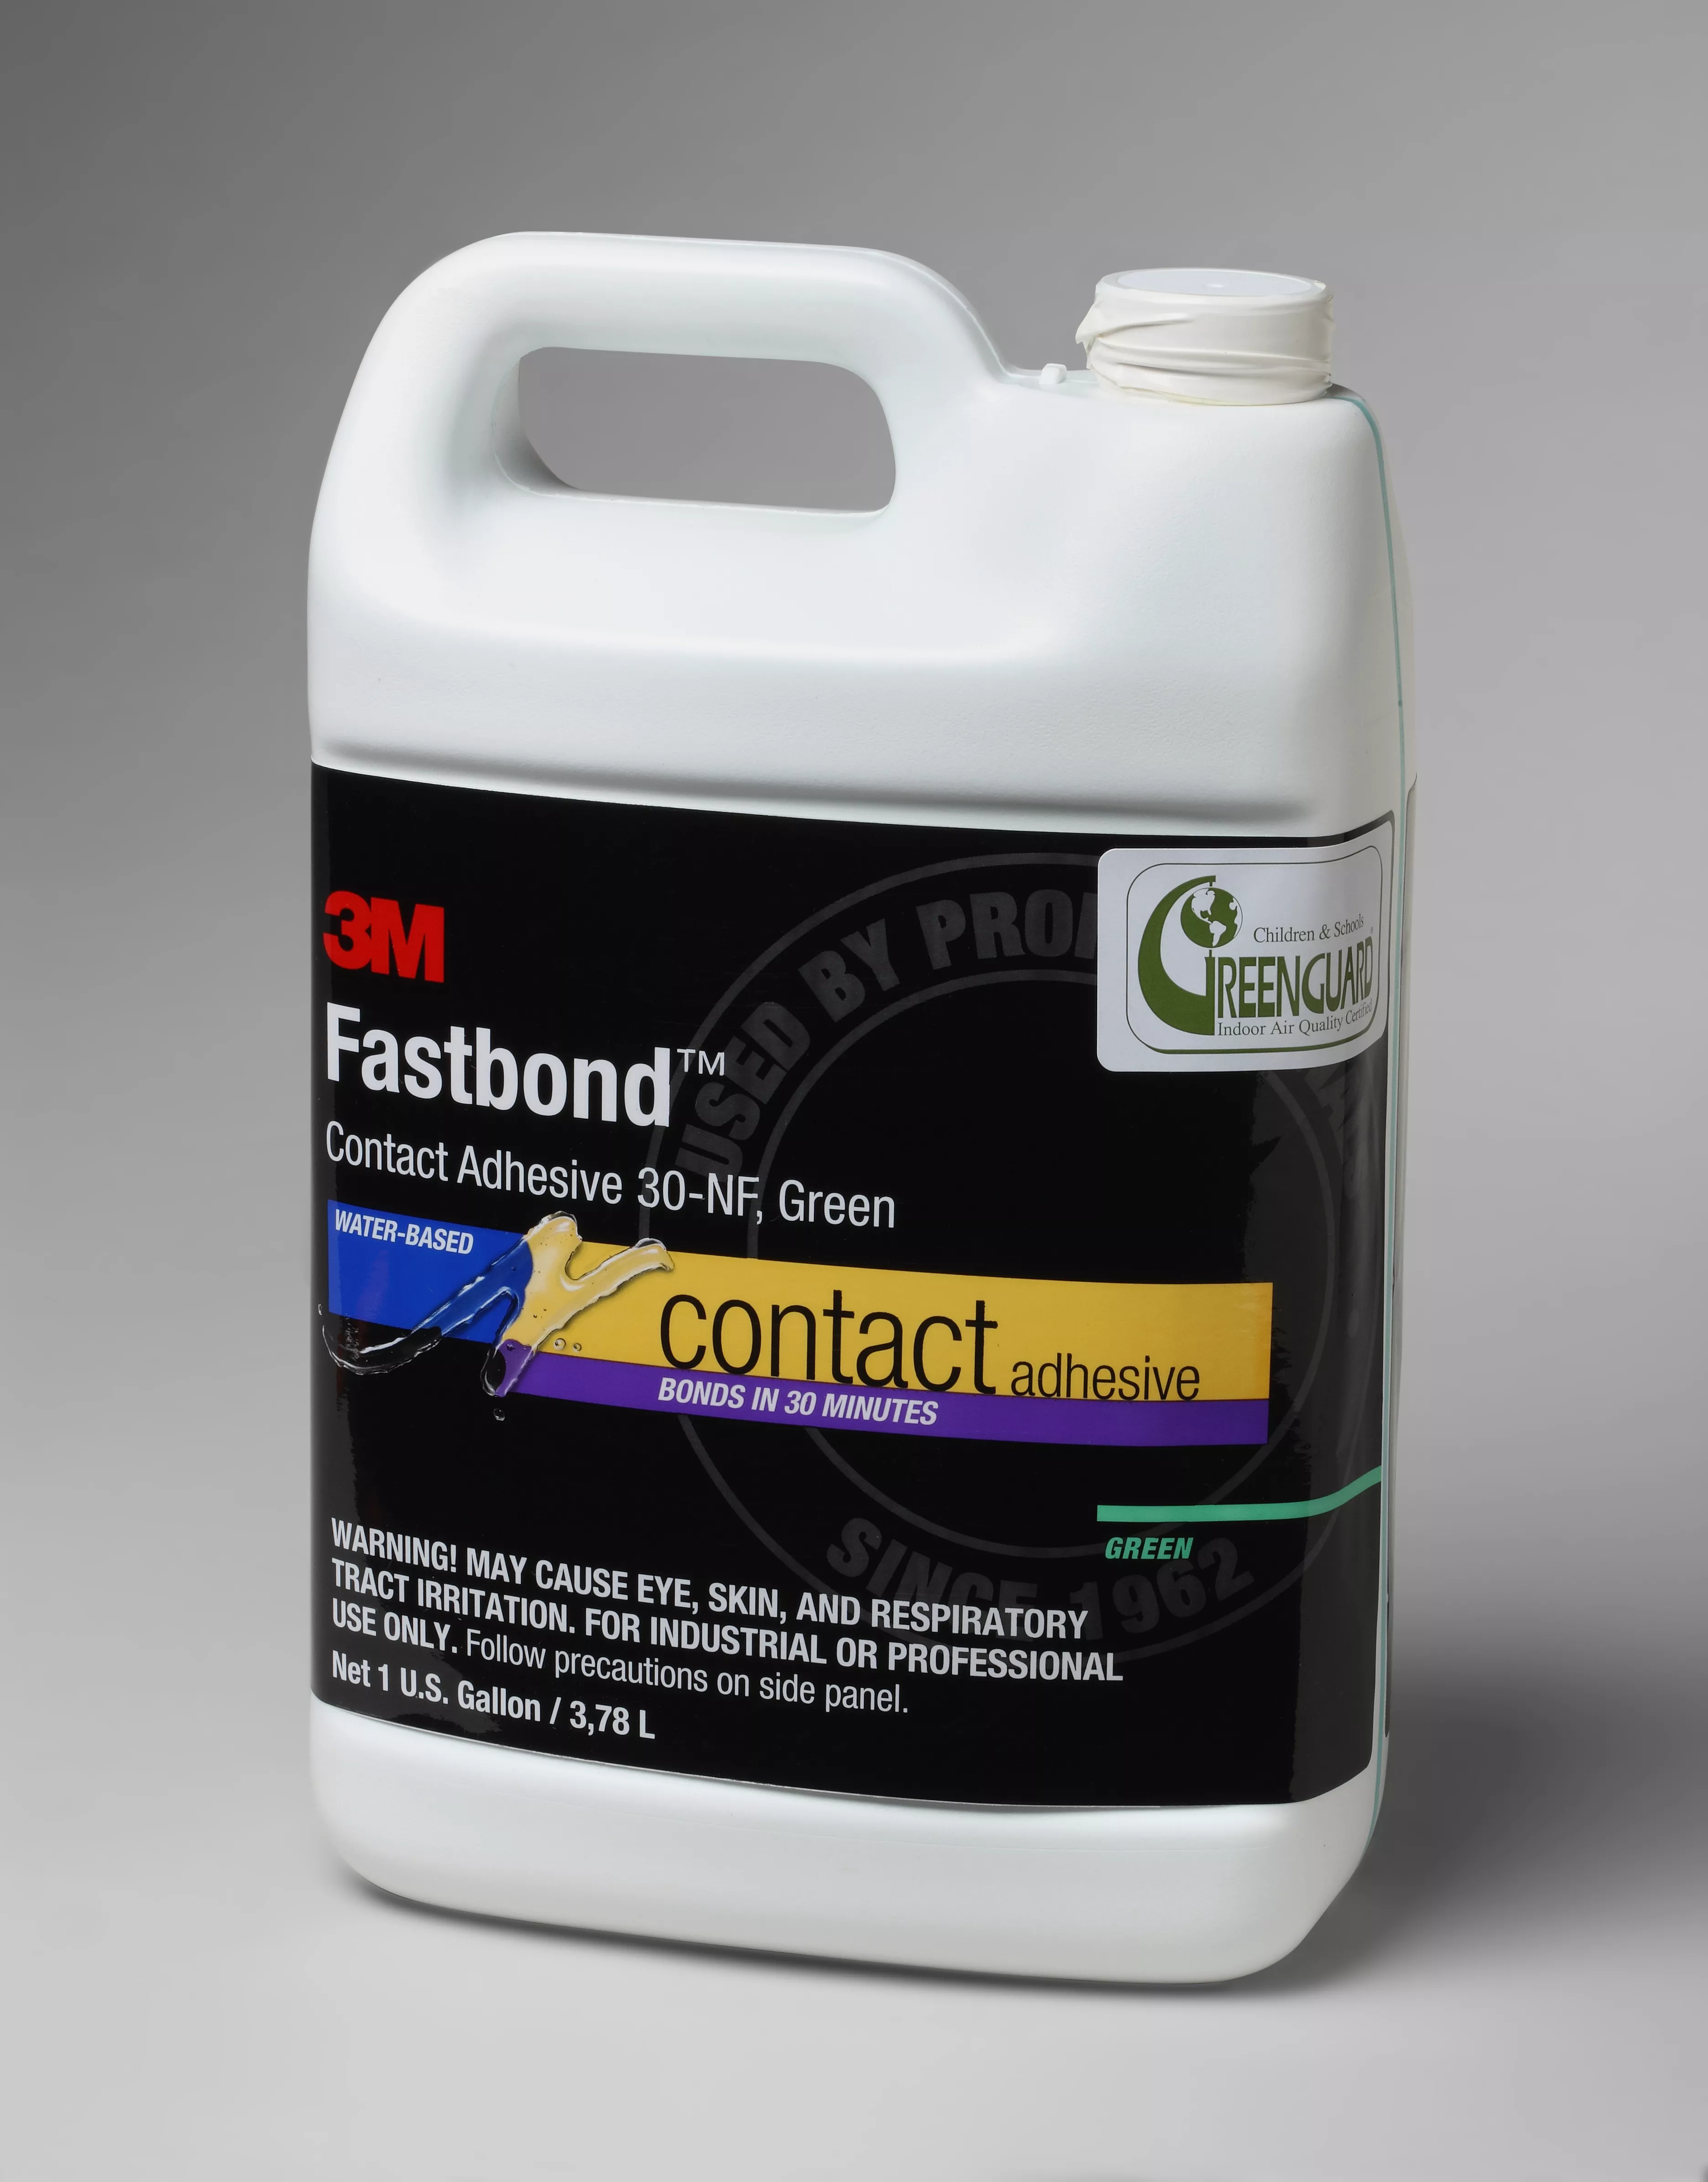 3M™ Fastbond™ Contact Adhesive 30NF, Green, 270 Gallon Returnable Tote
with Cage, IBC